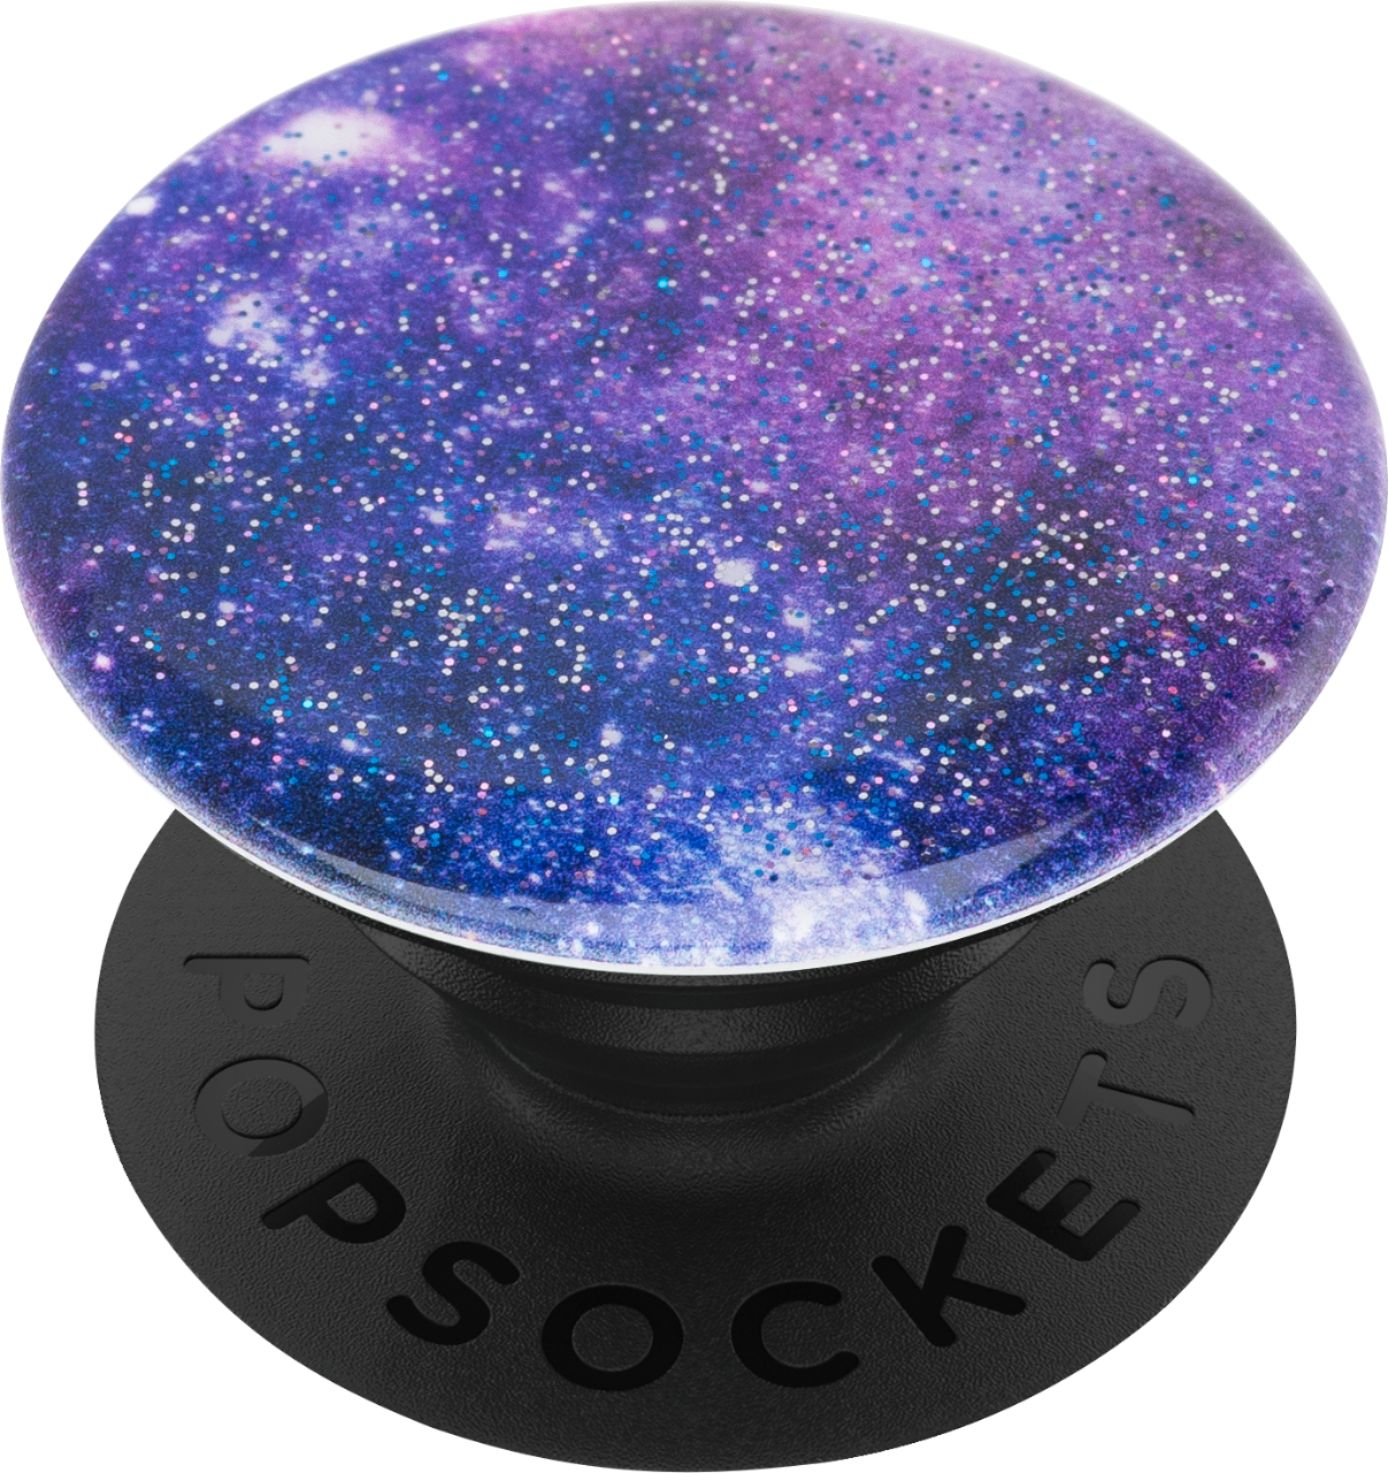 Stylish Pop Socket  Perfect for Secure Grip and Convenience